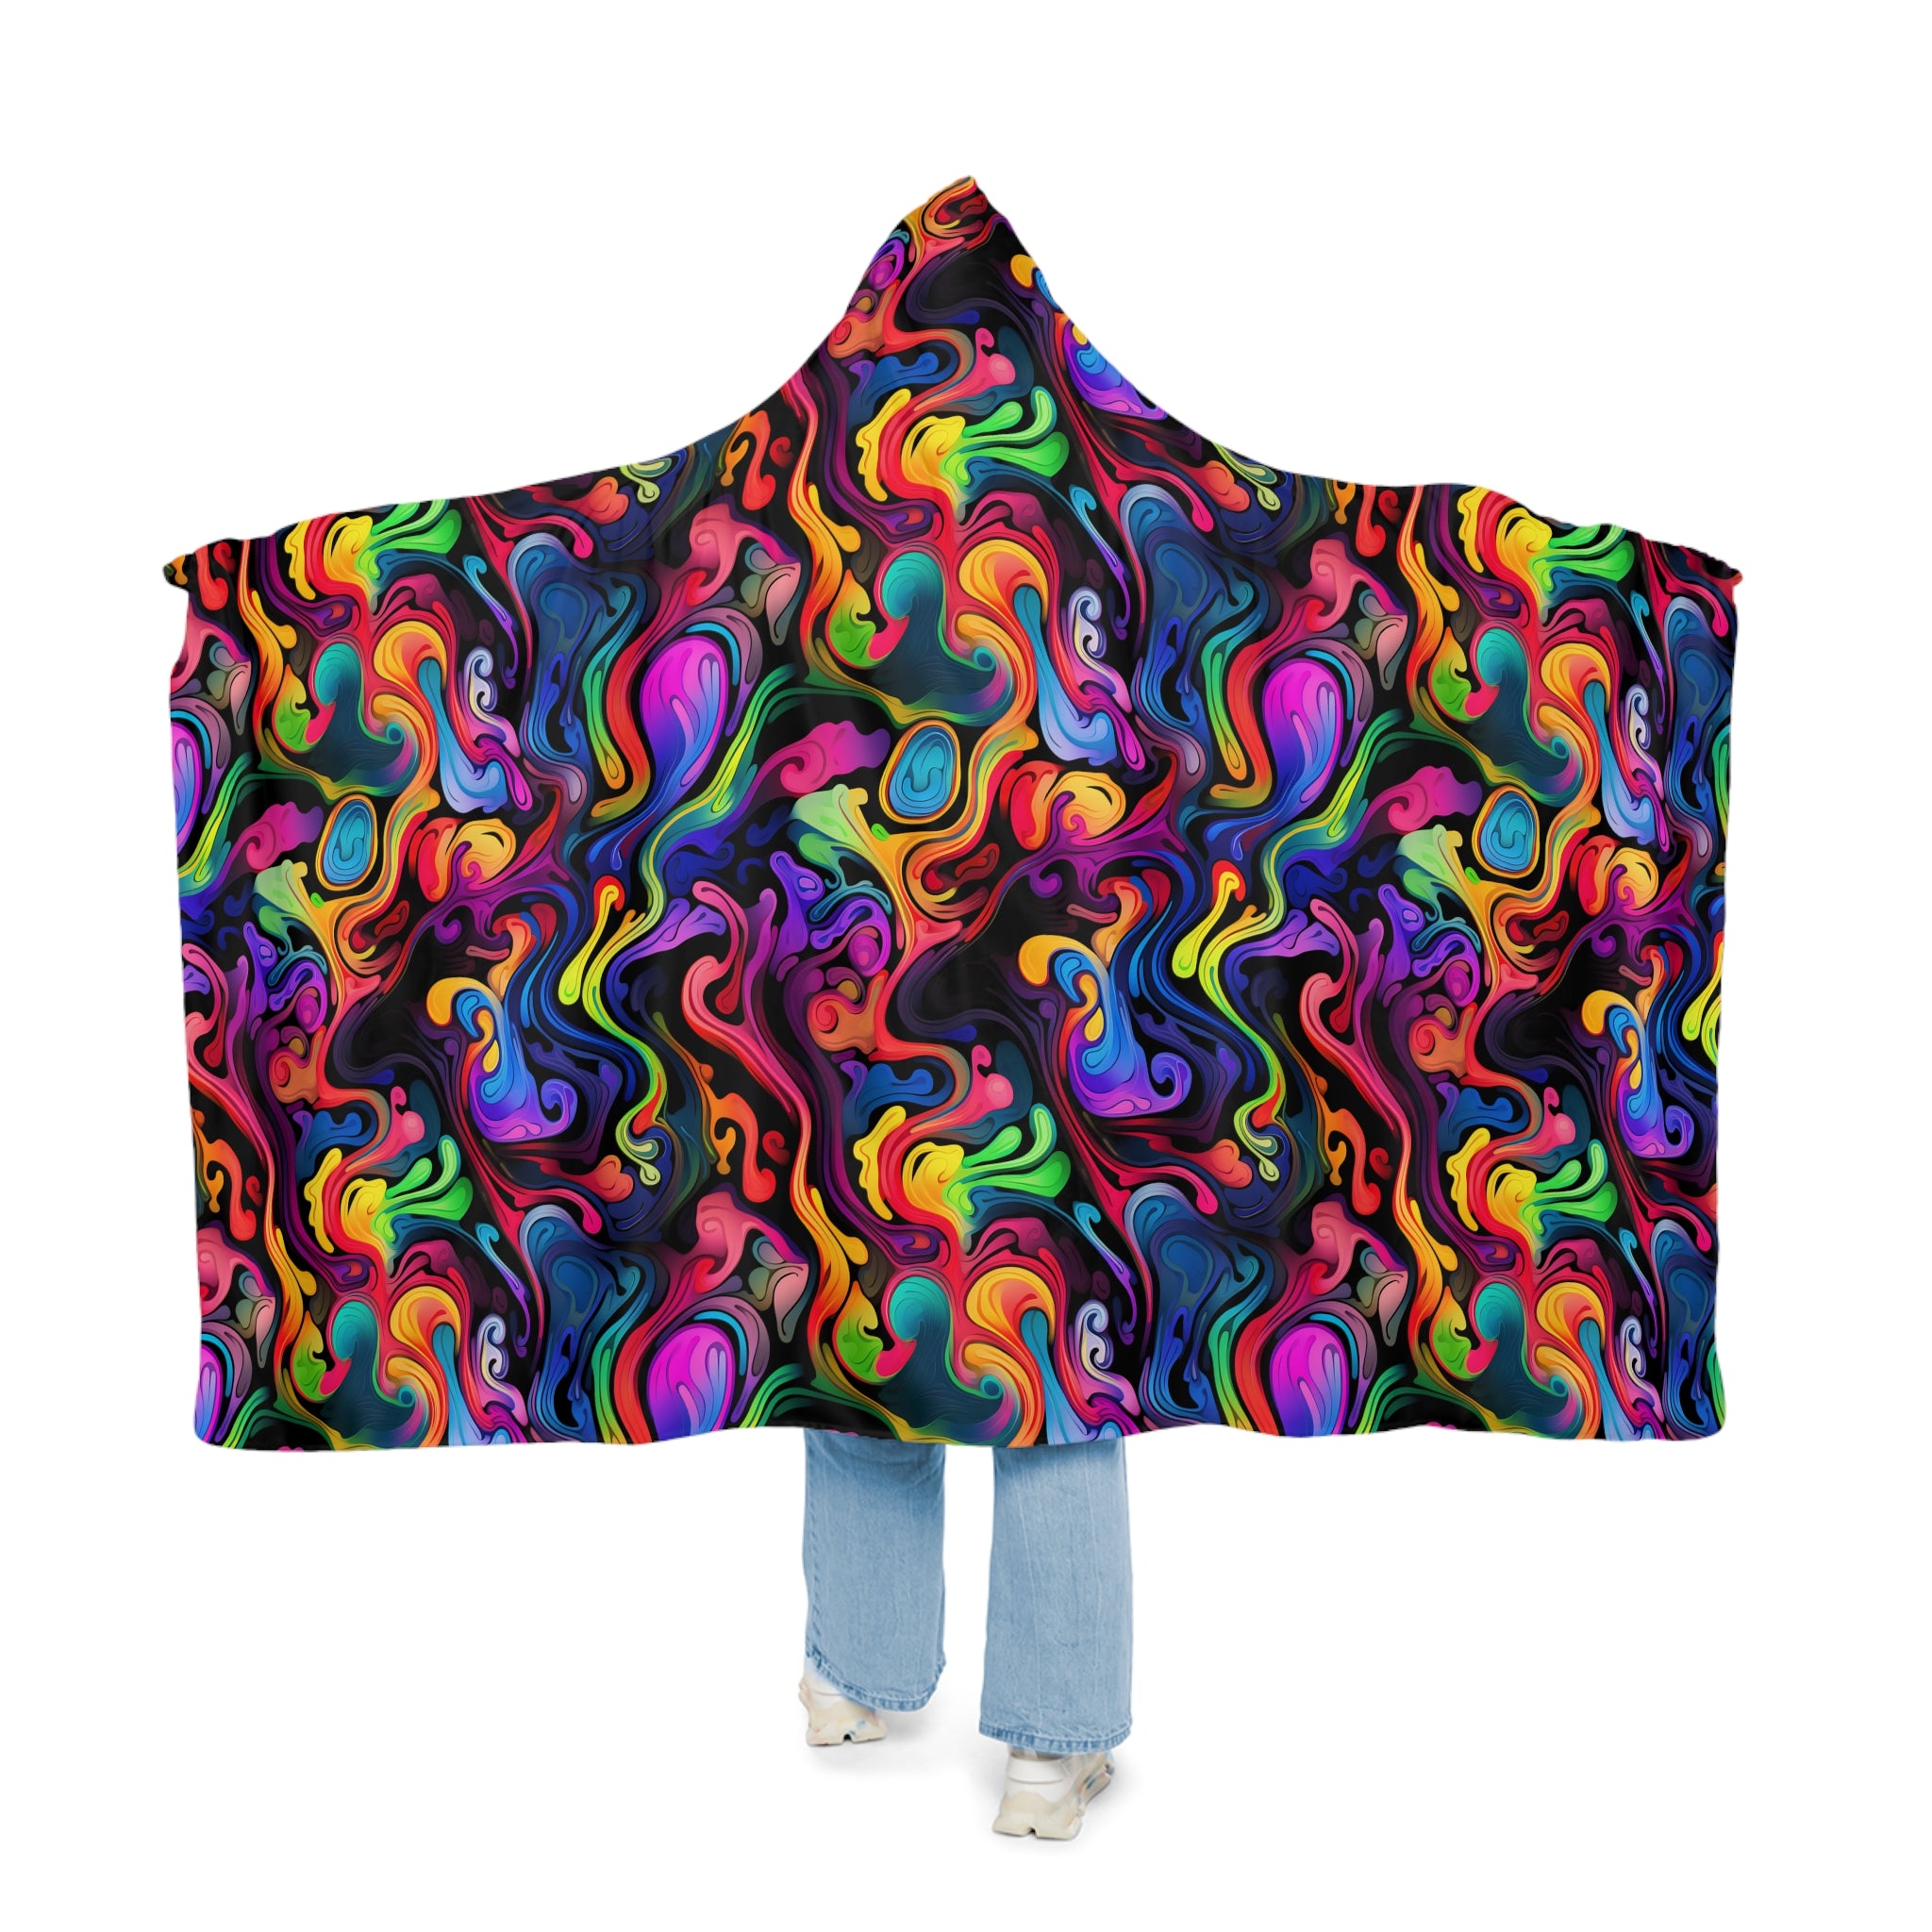 Psychedelic Whirlwind Snuggle Blanket